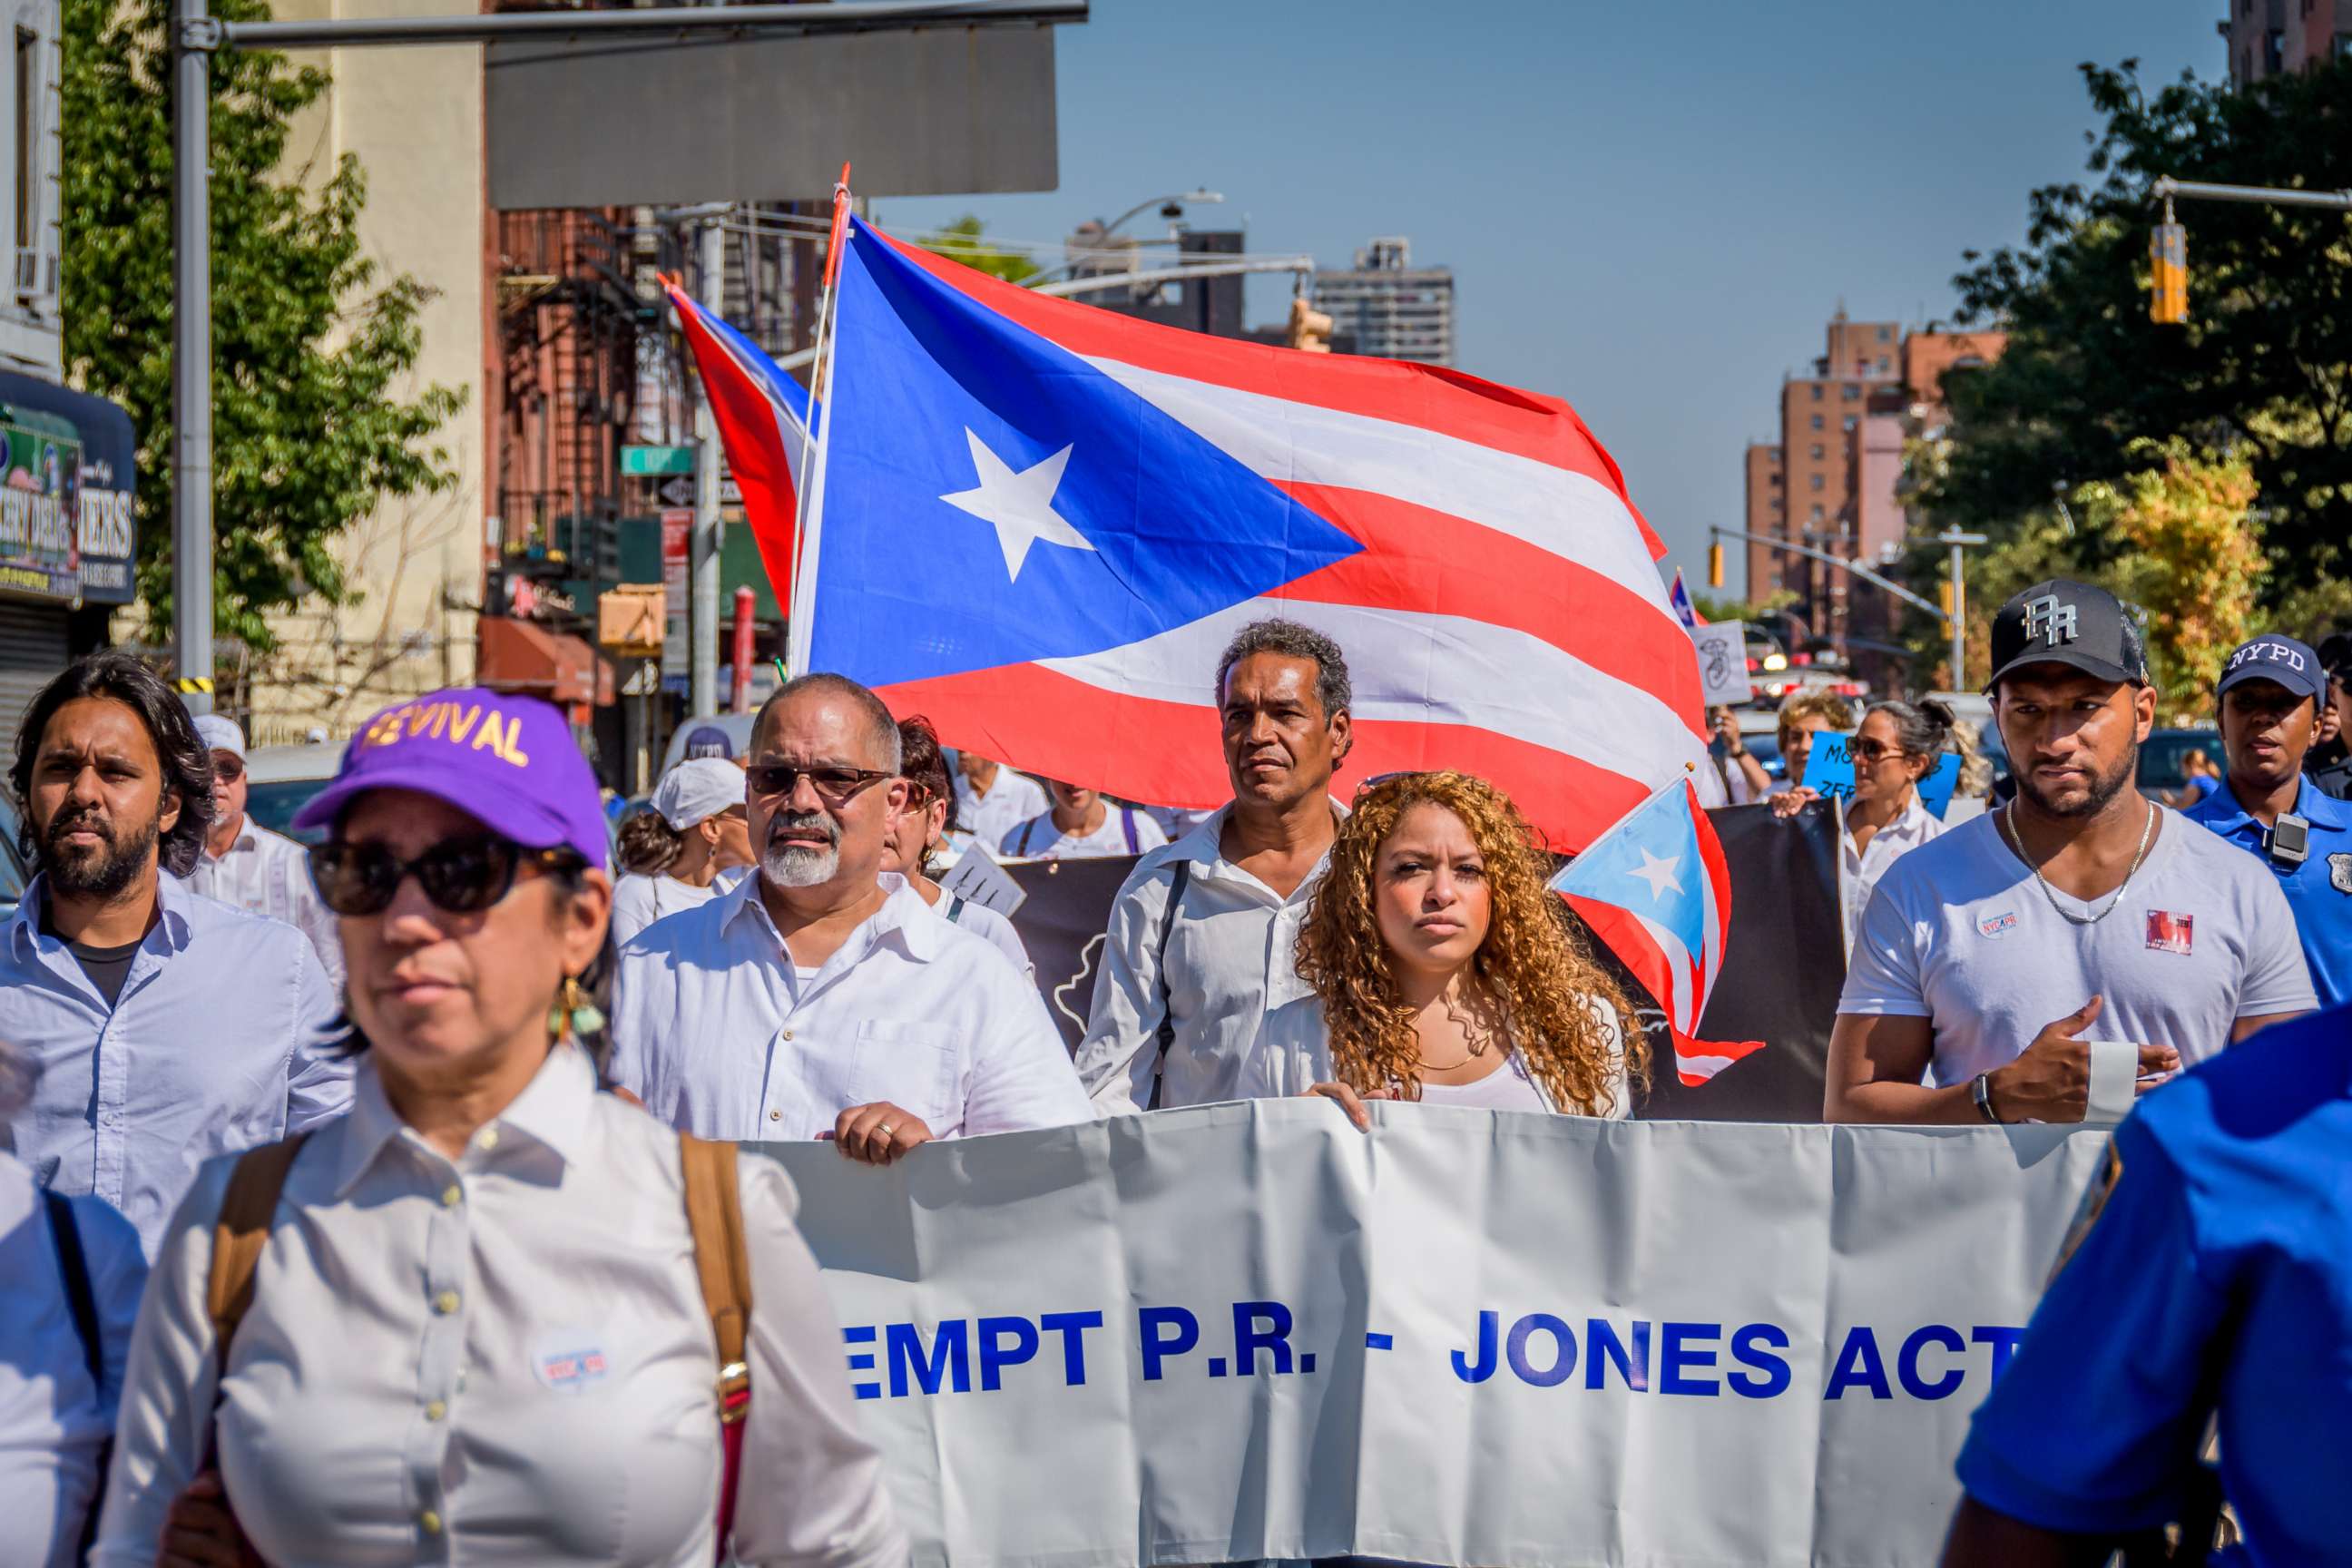 PHOTO: Puerto Ricans dressed in white march in protest of the U.S. treatment of Puerto Rico in the aftermath of Hurricane Maria, in New York, Sept. 22, 2019.